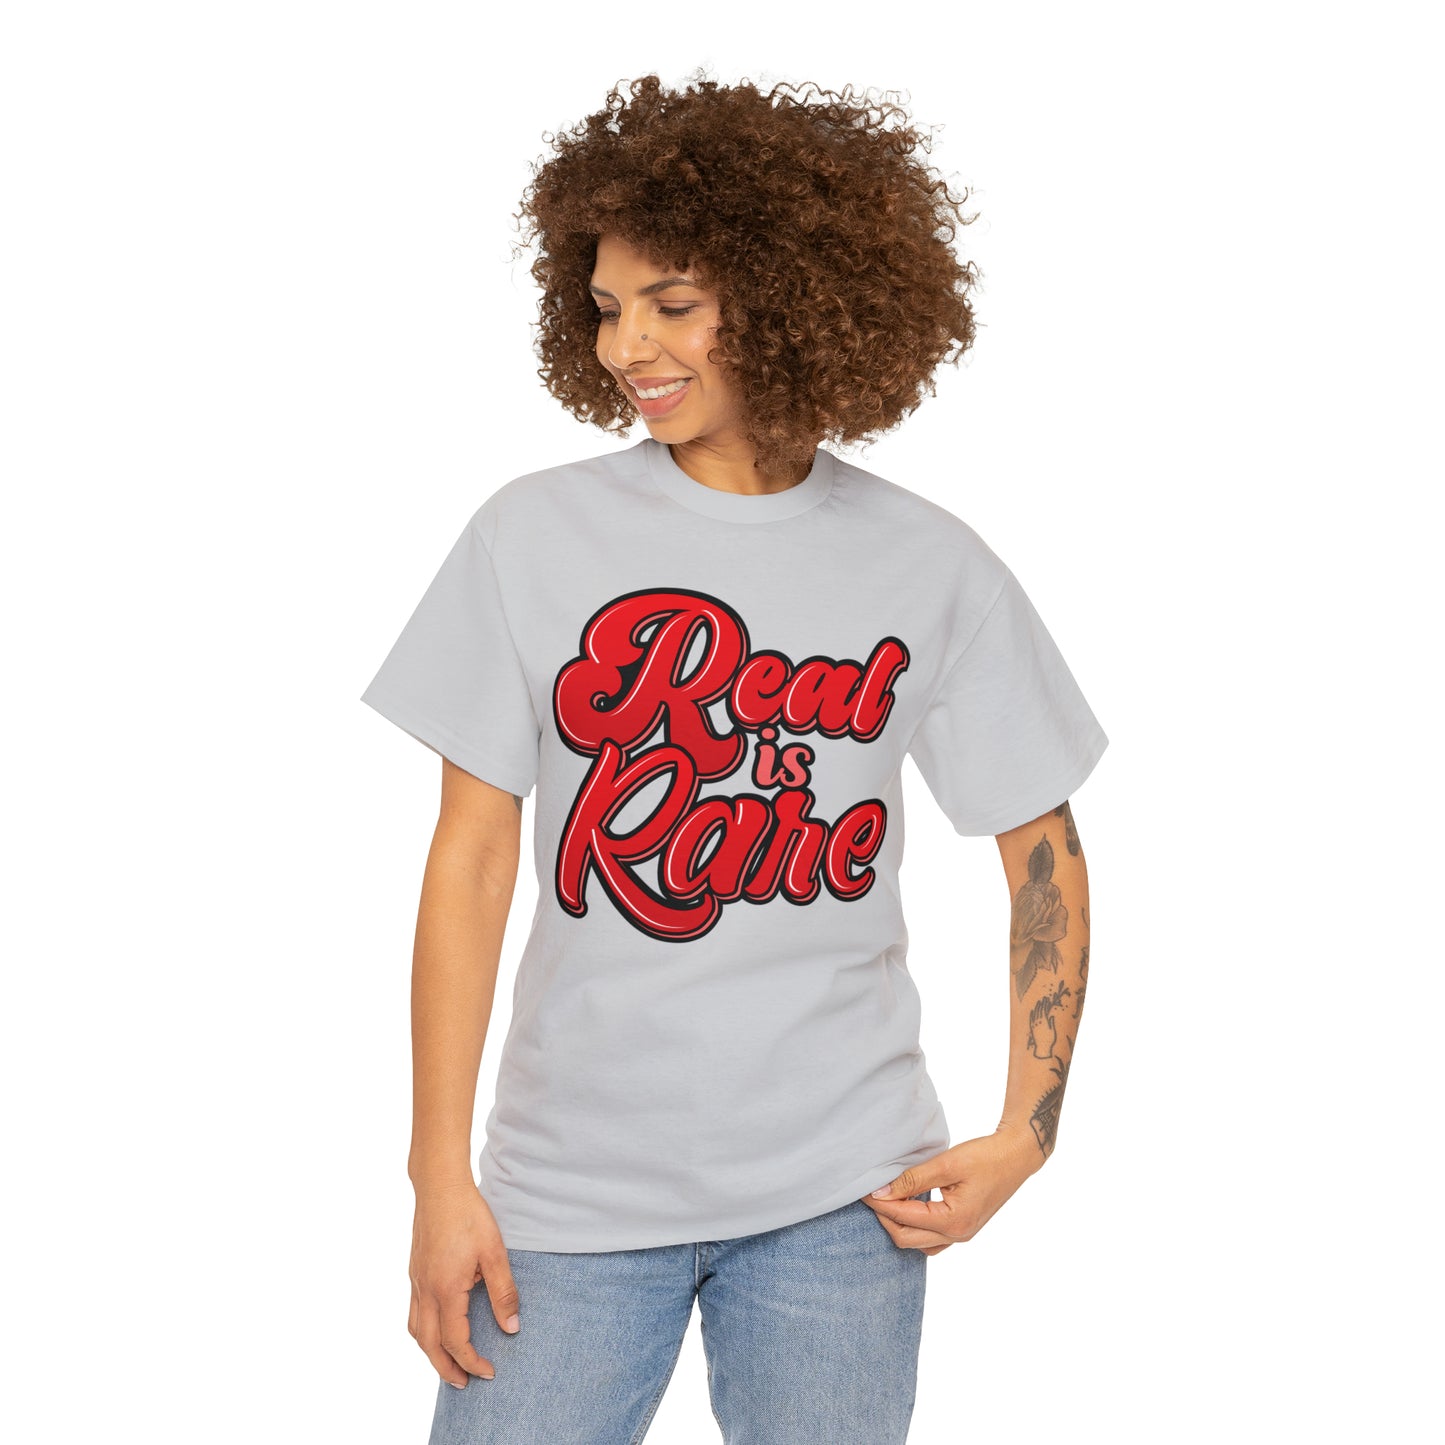 Real is rare Tee